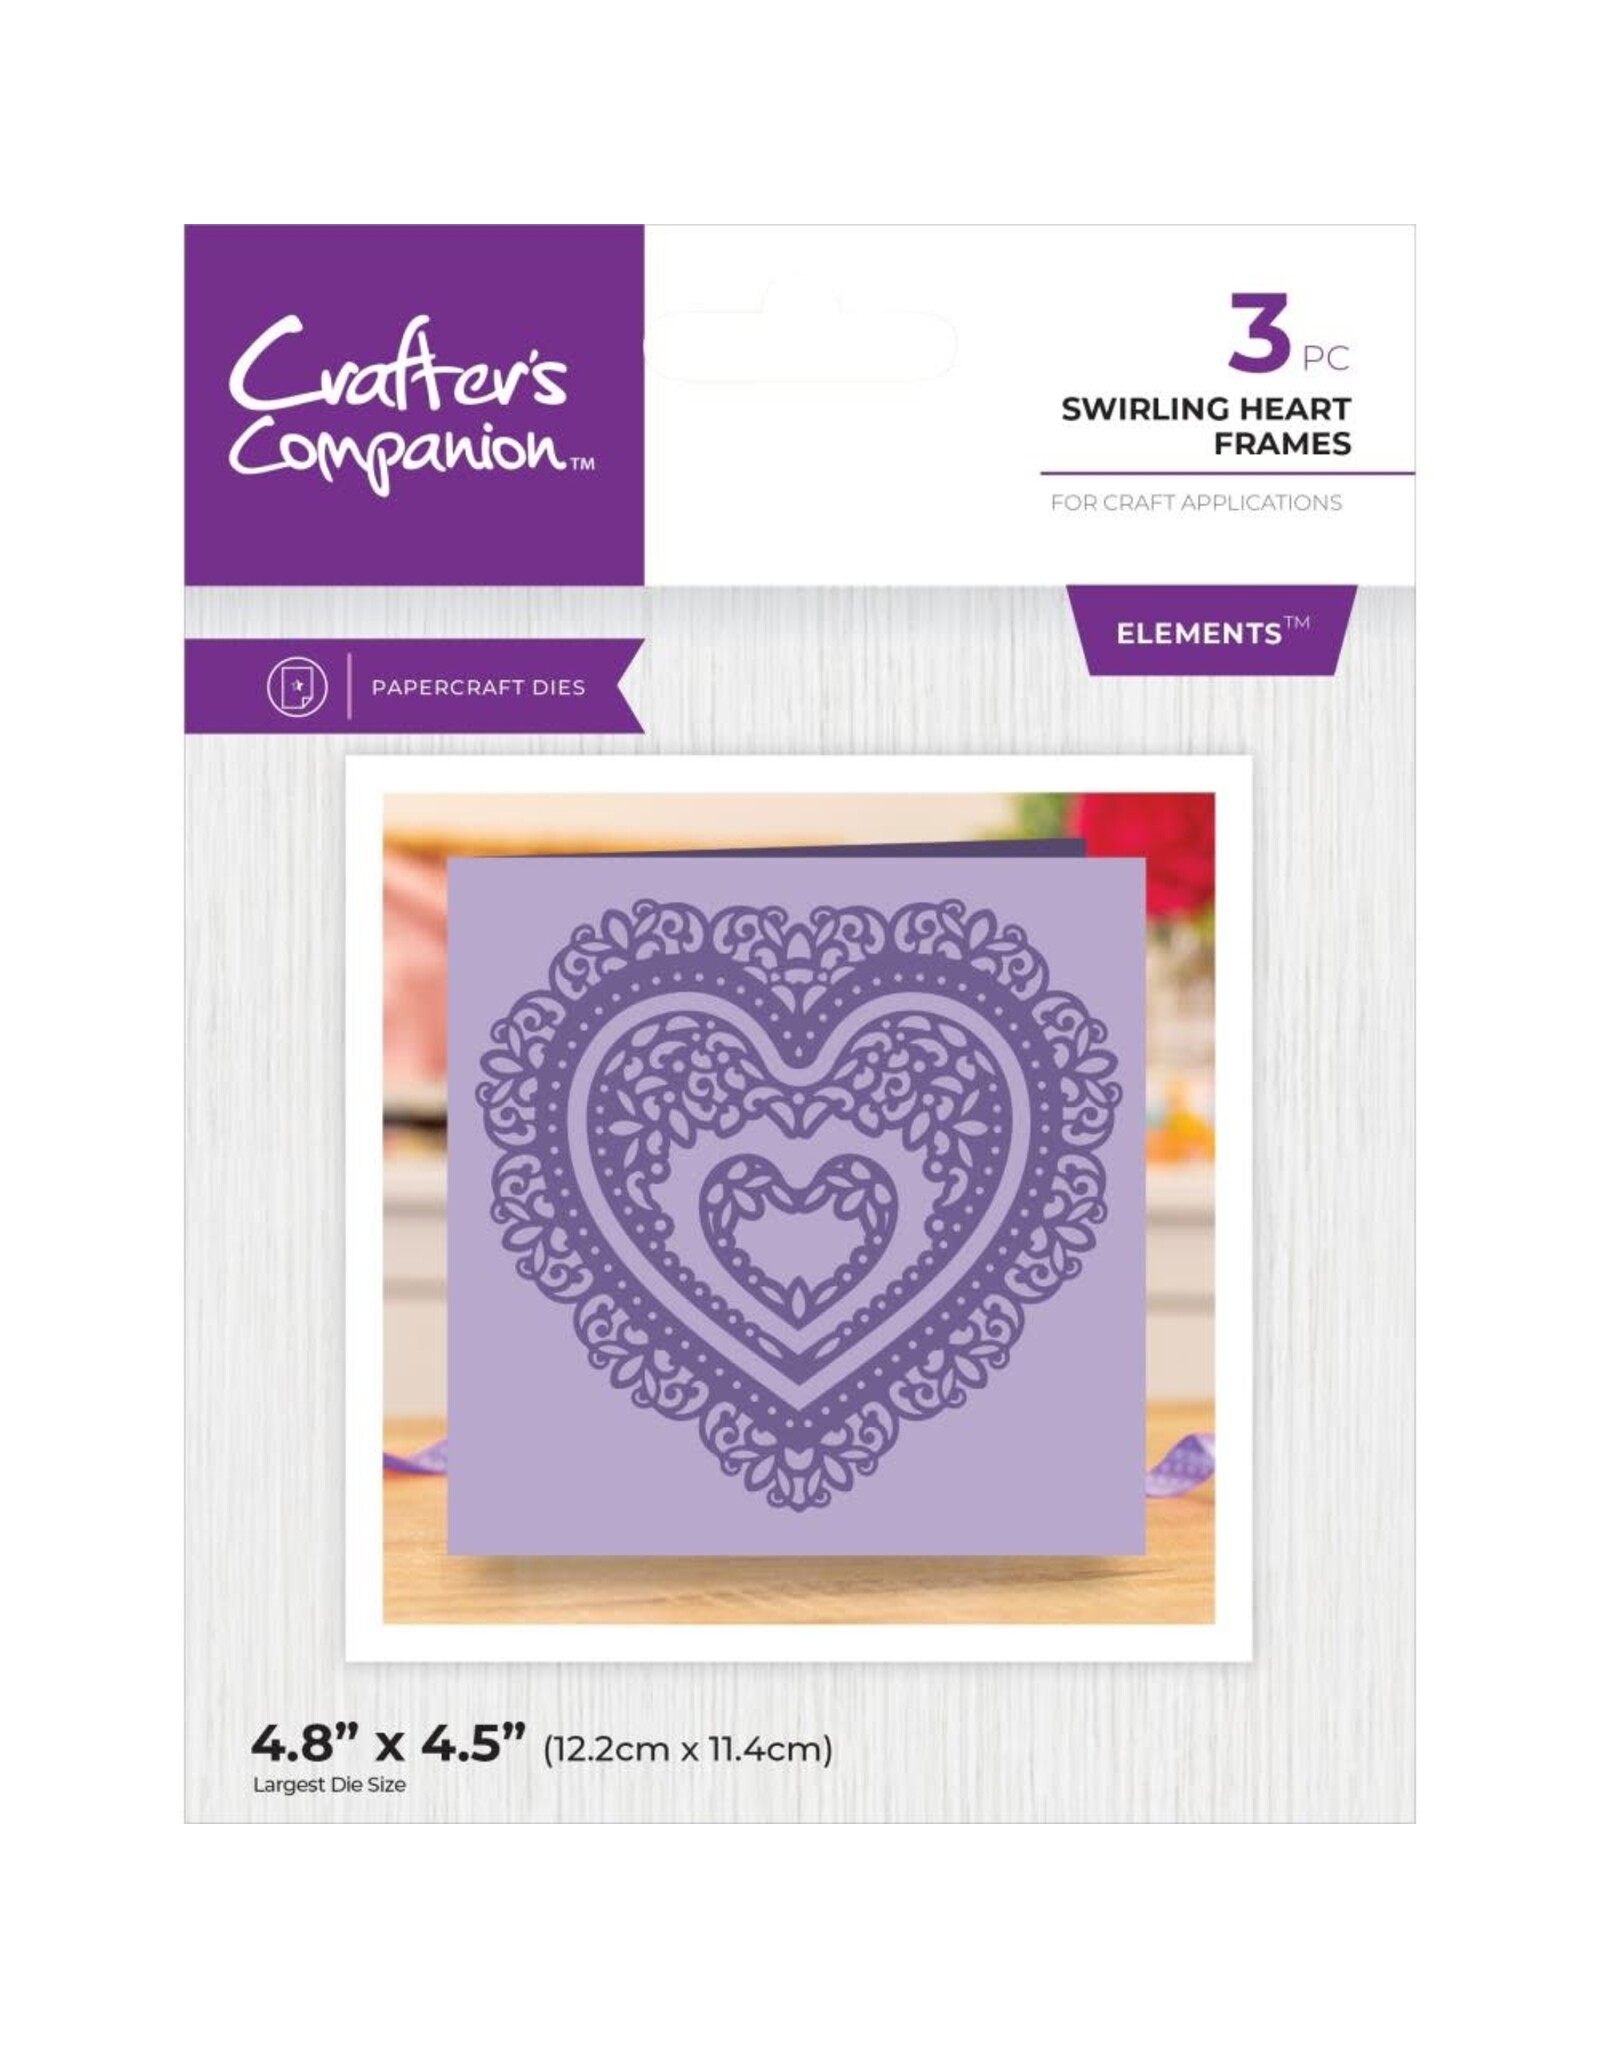 CRAFTERS COMPANION CRAFTERS COMPANION ELEMENTS SWIRLING HEART FRAMES DIE SET